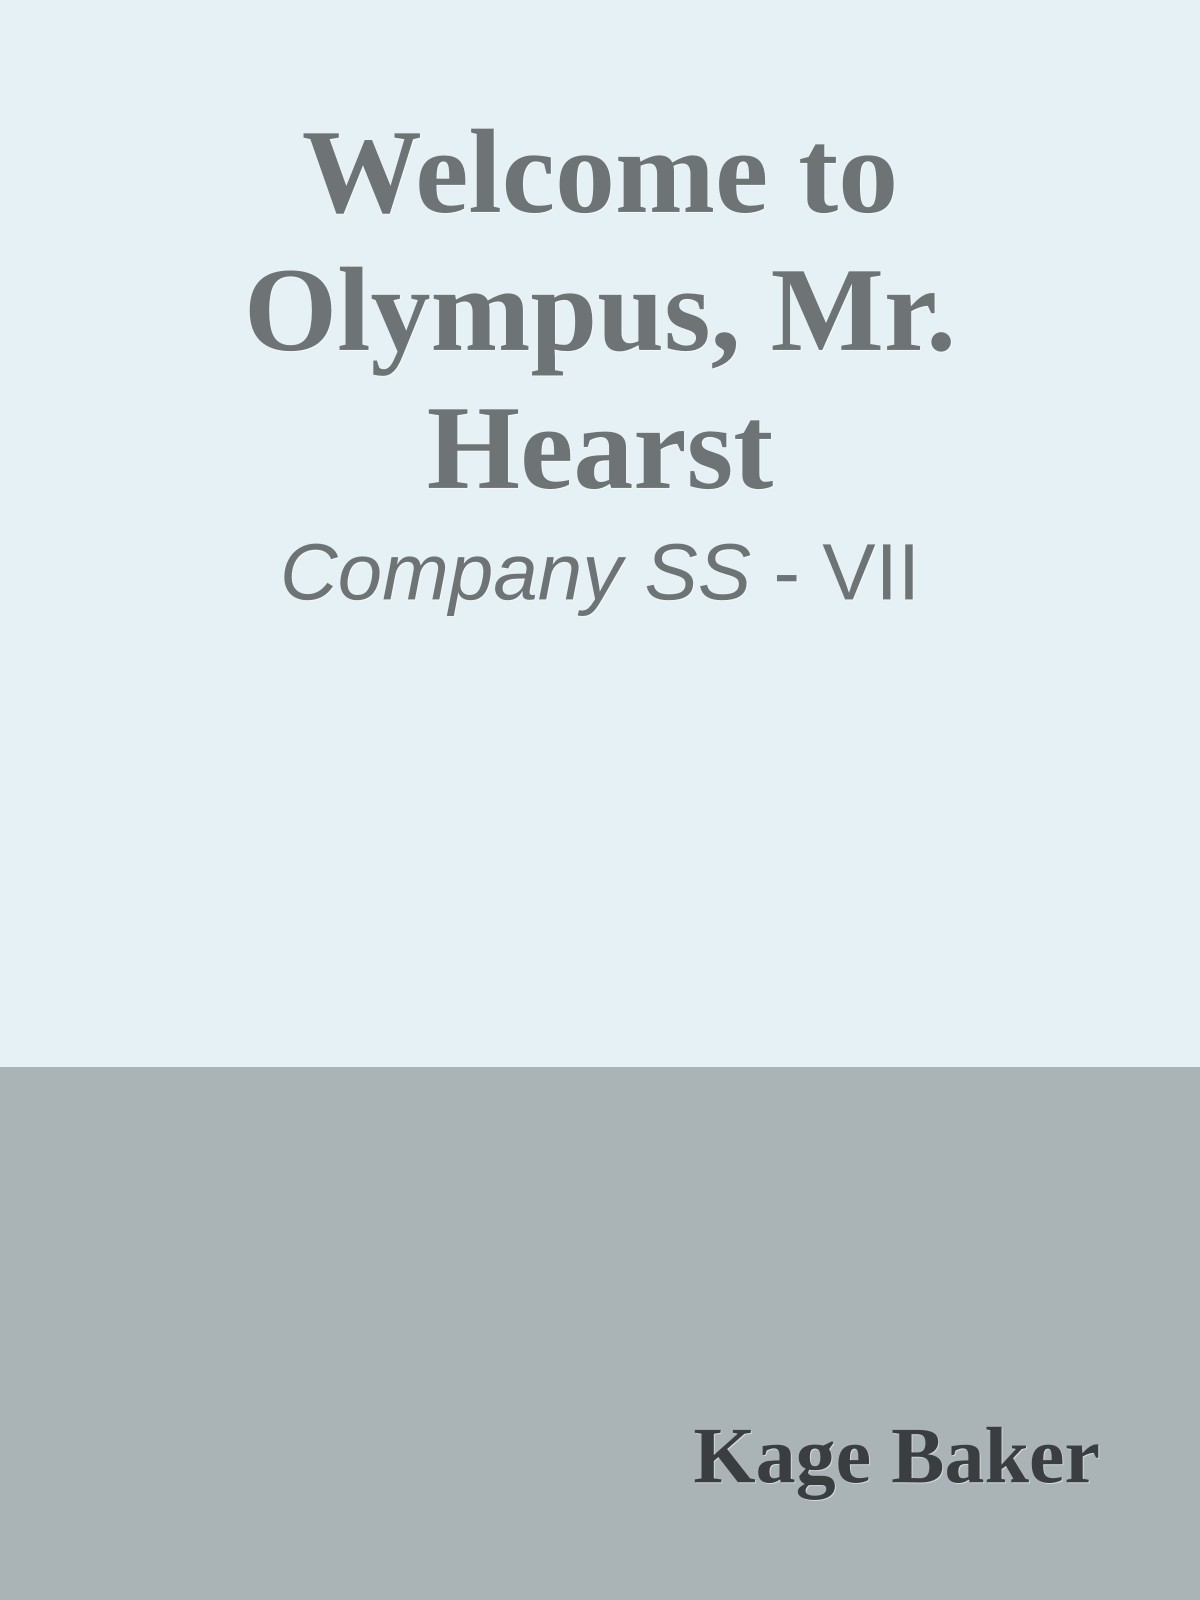 Welcome to Olympus, Mr. Hearst